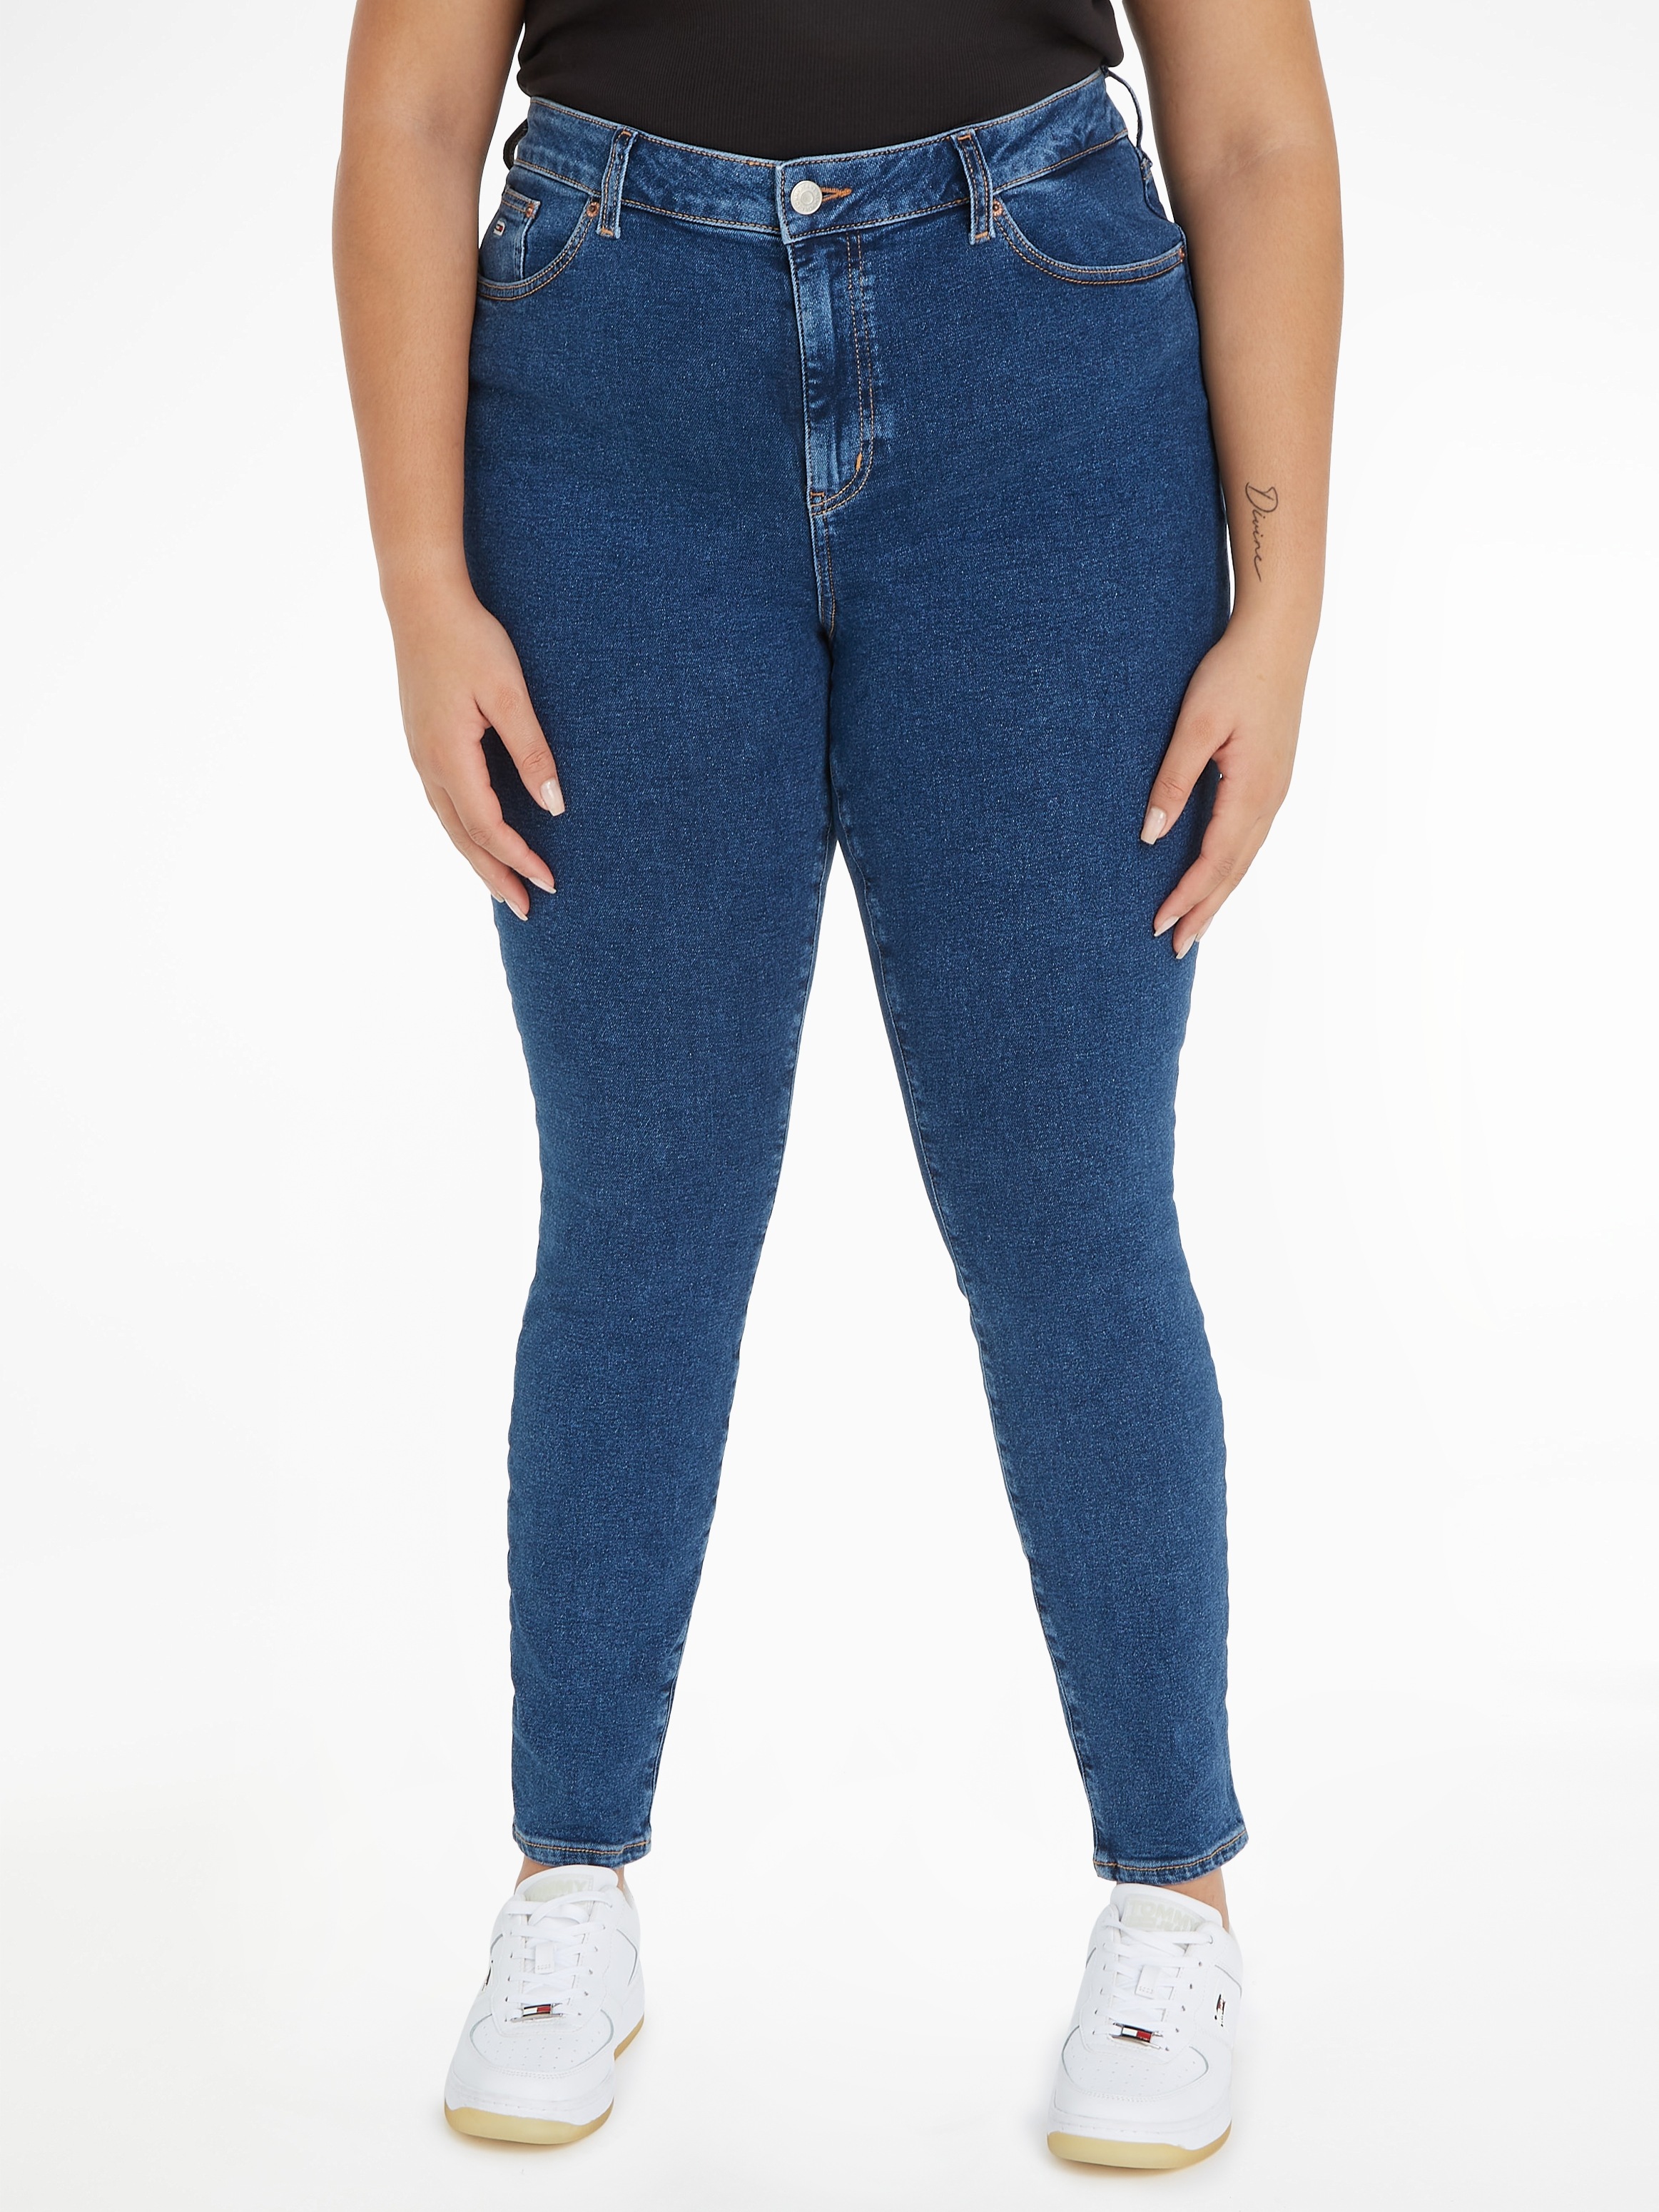 Tommy Jeans Curve Skinny-fit-Jeans, PLUS SIZE CURVE, Jeans wird in Weiten  angeboten bei OTTOversand